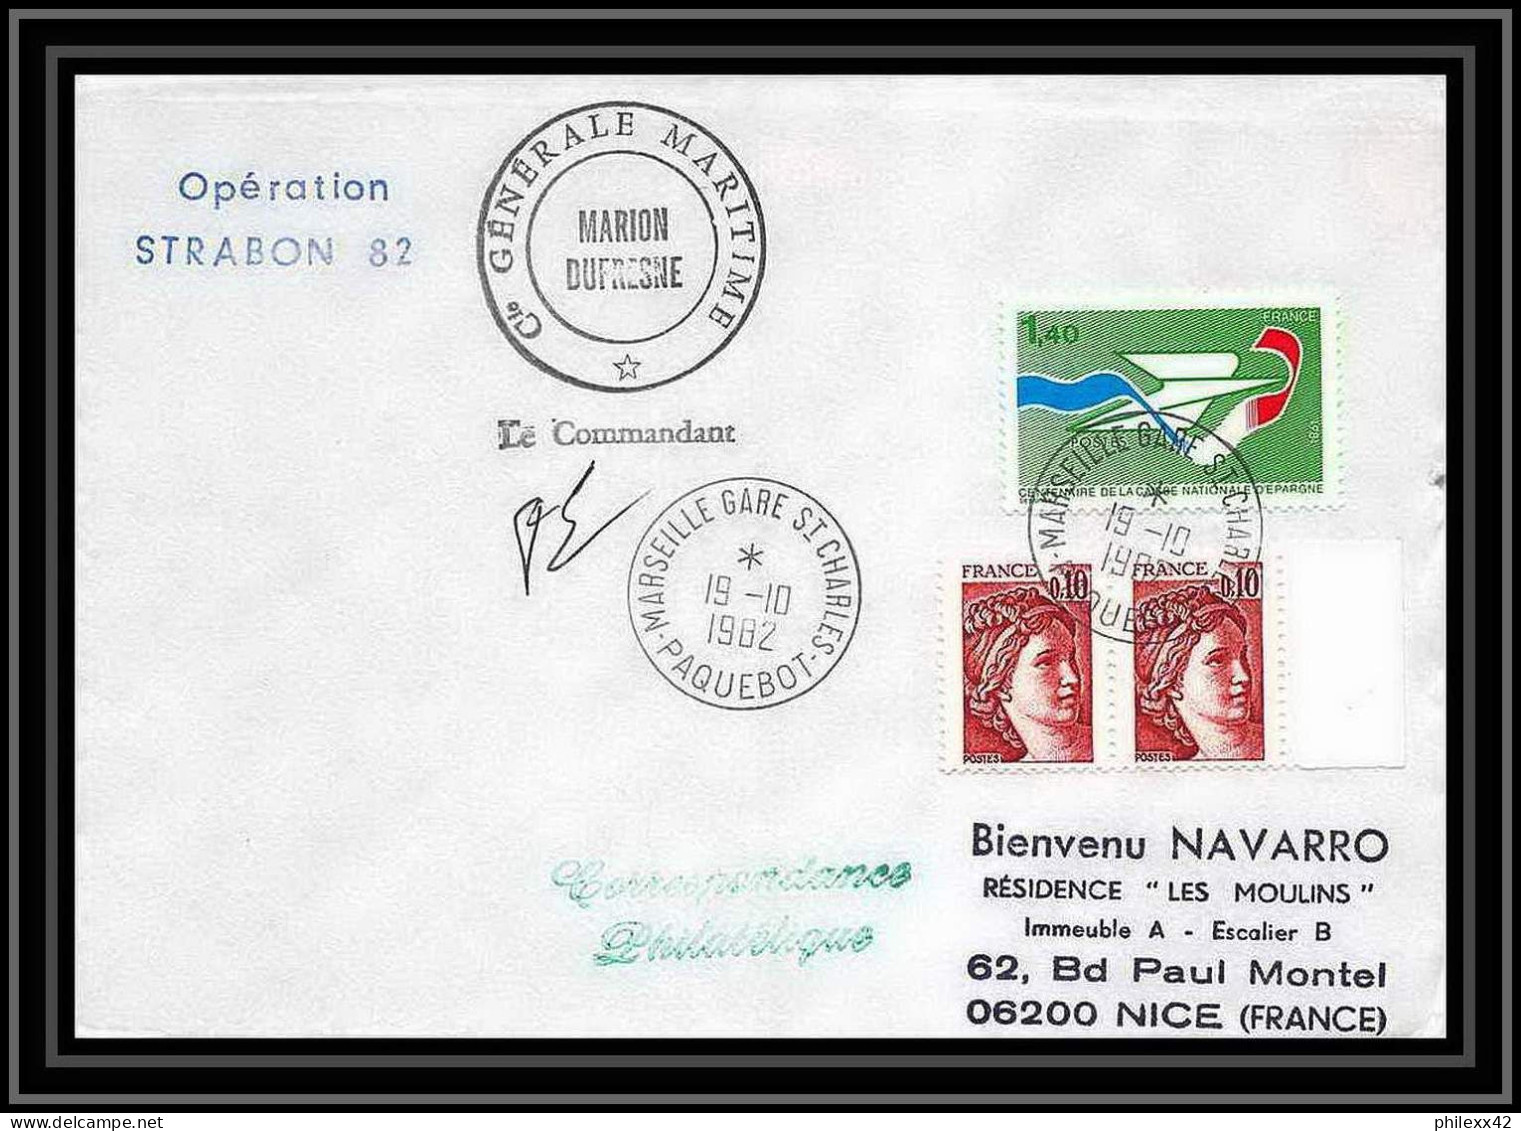 1355 Opération Strabon 82 Marion Dufresne Signé Signed 19/10/1982 TAAF Antarctic Terres Australes Lettre (cover) - Antarctische Expedities